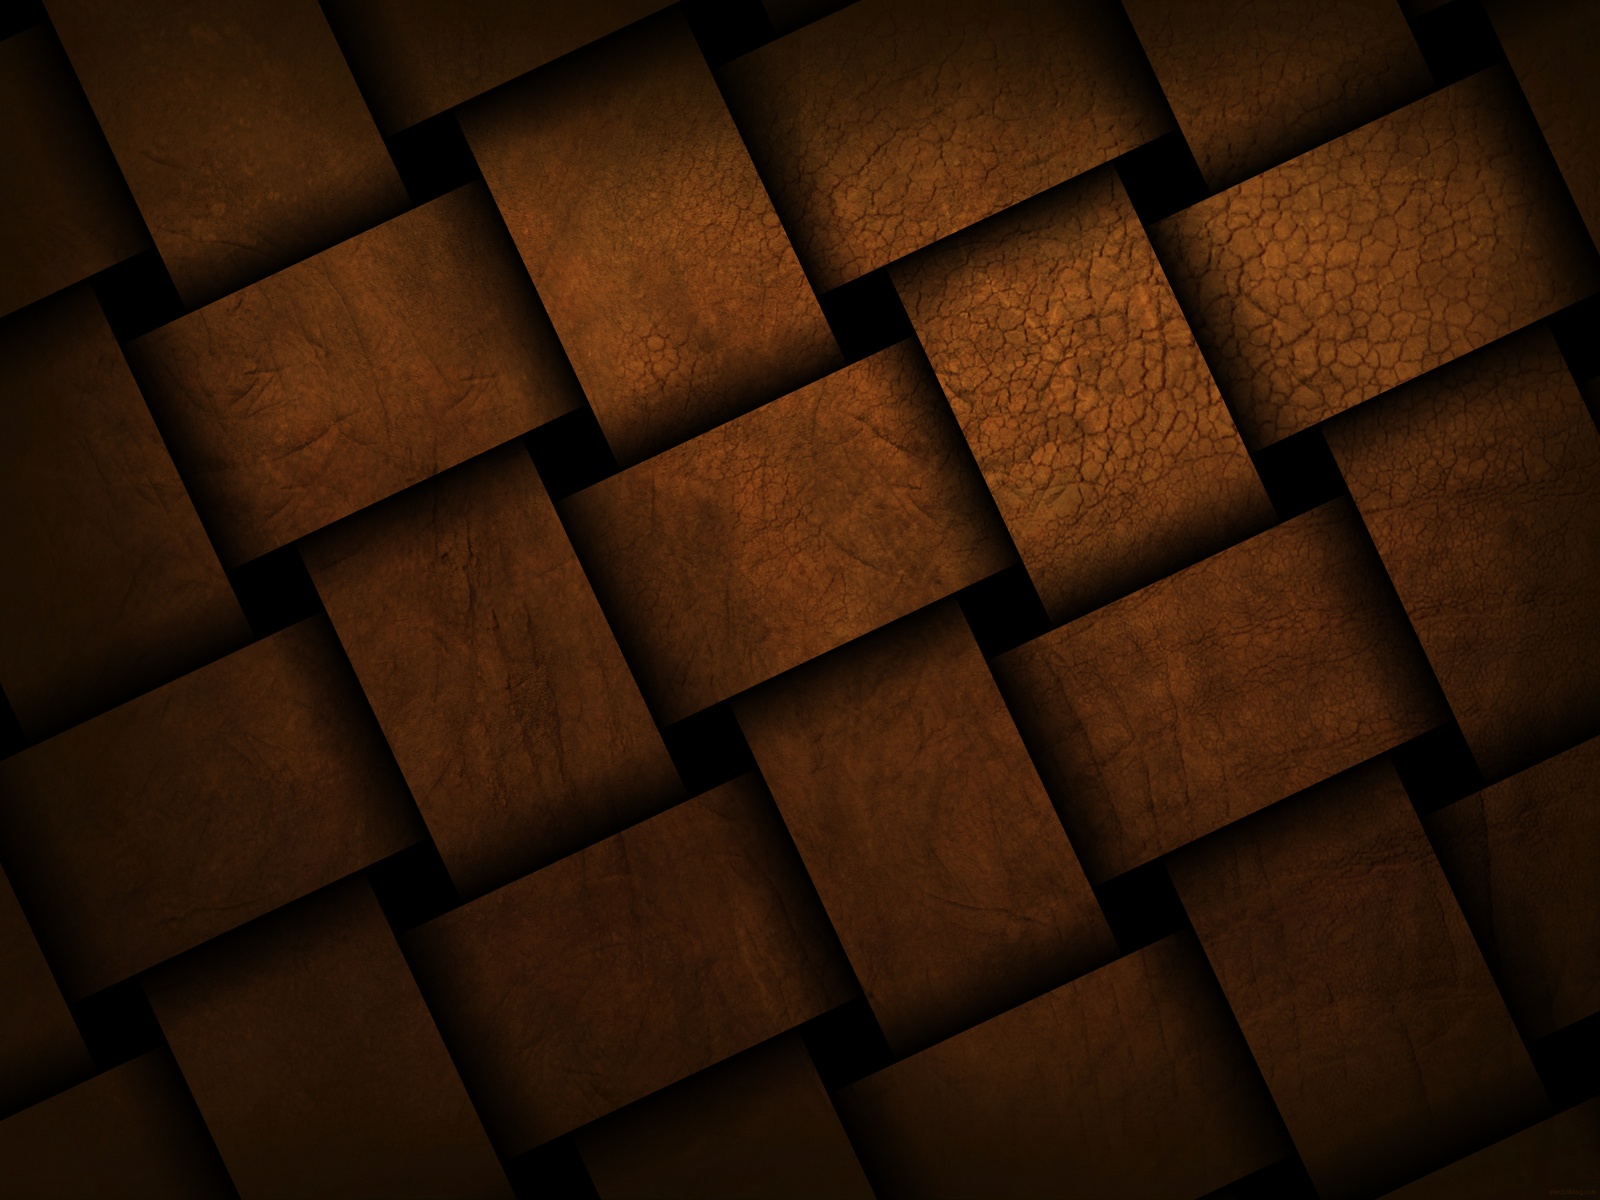  Brown Wallpaper Hd Android Desktop Abstract Iphone 5 Design Backgournd